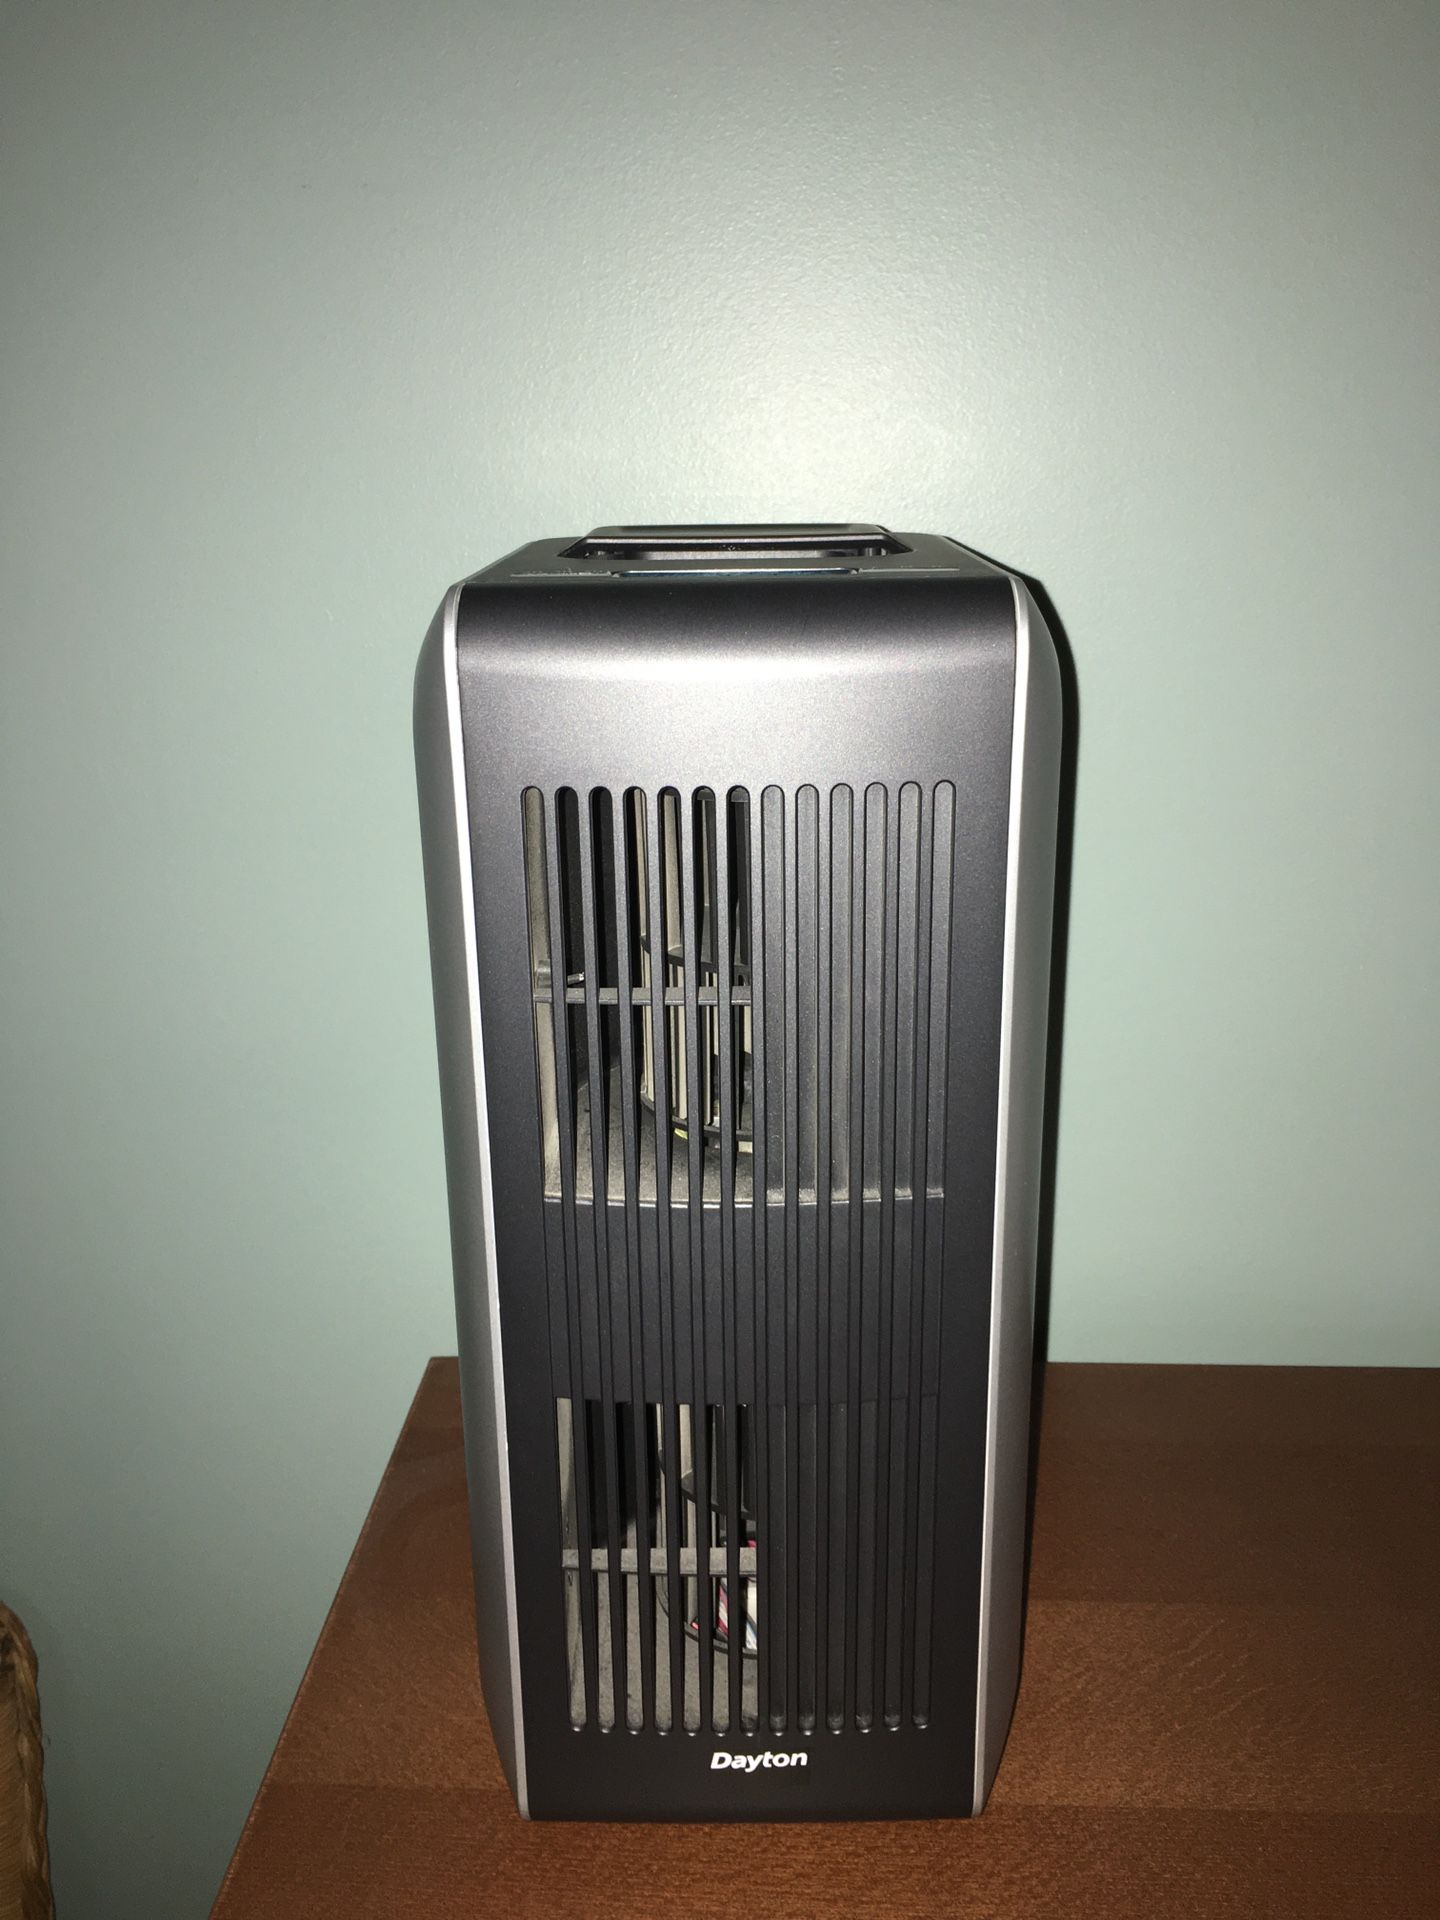 Dayton Hepa Air Cleaner Model 2HPE1, Extra Filters, Accessories-$60